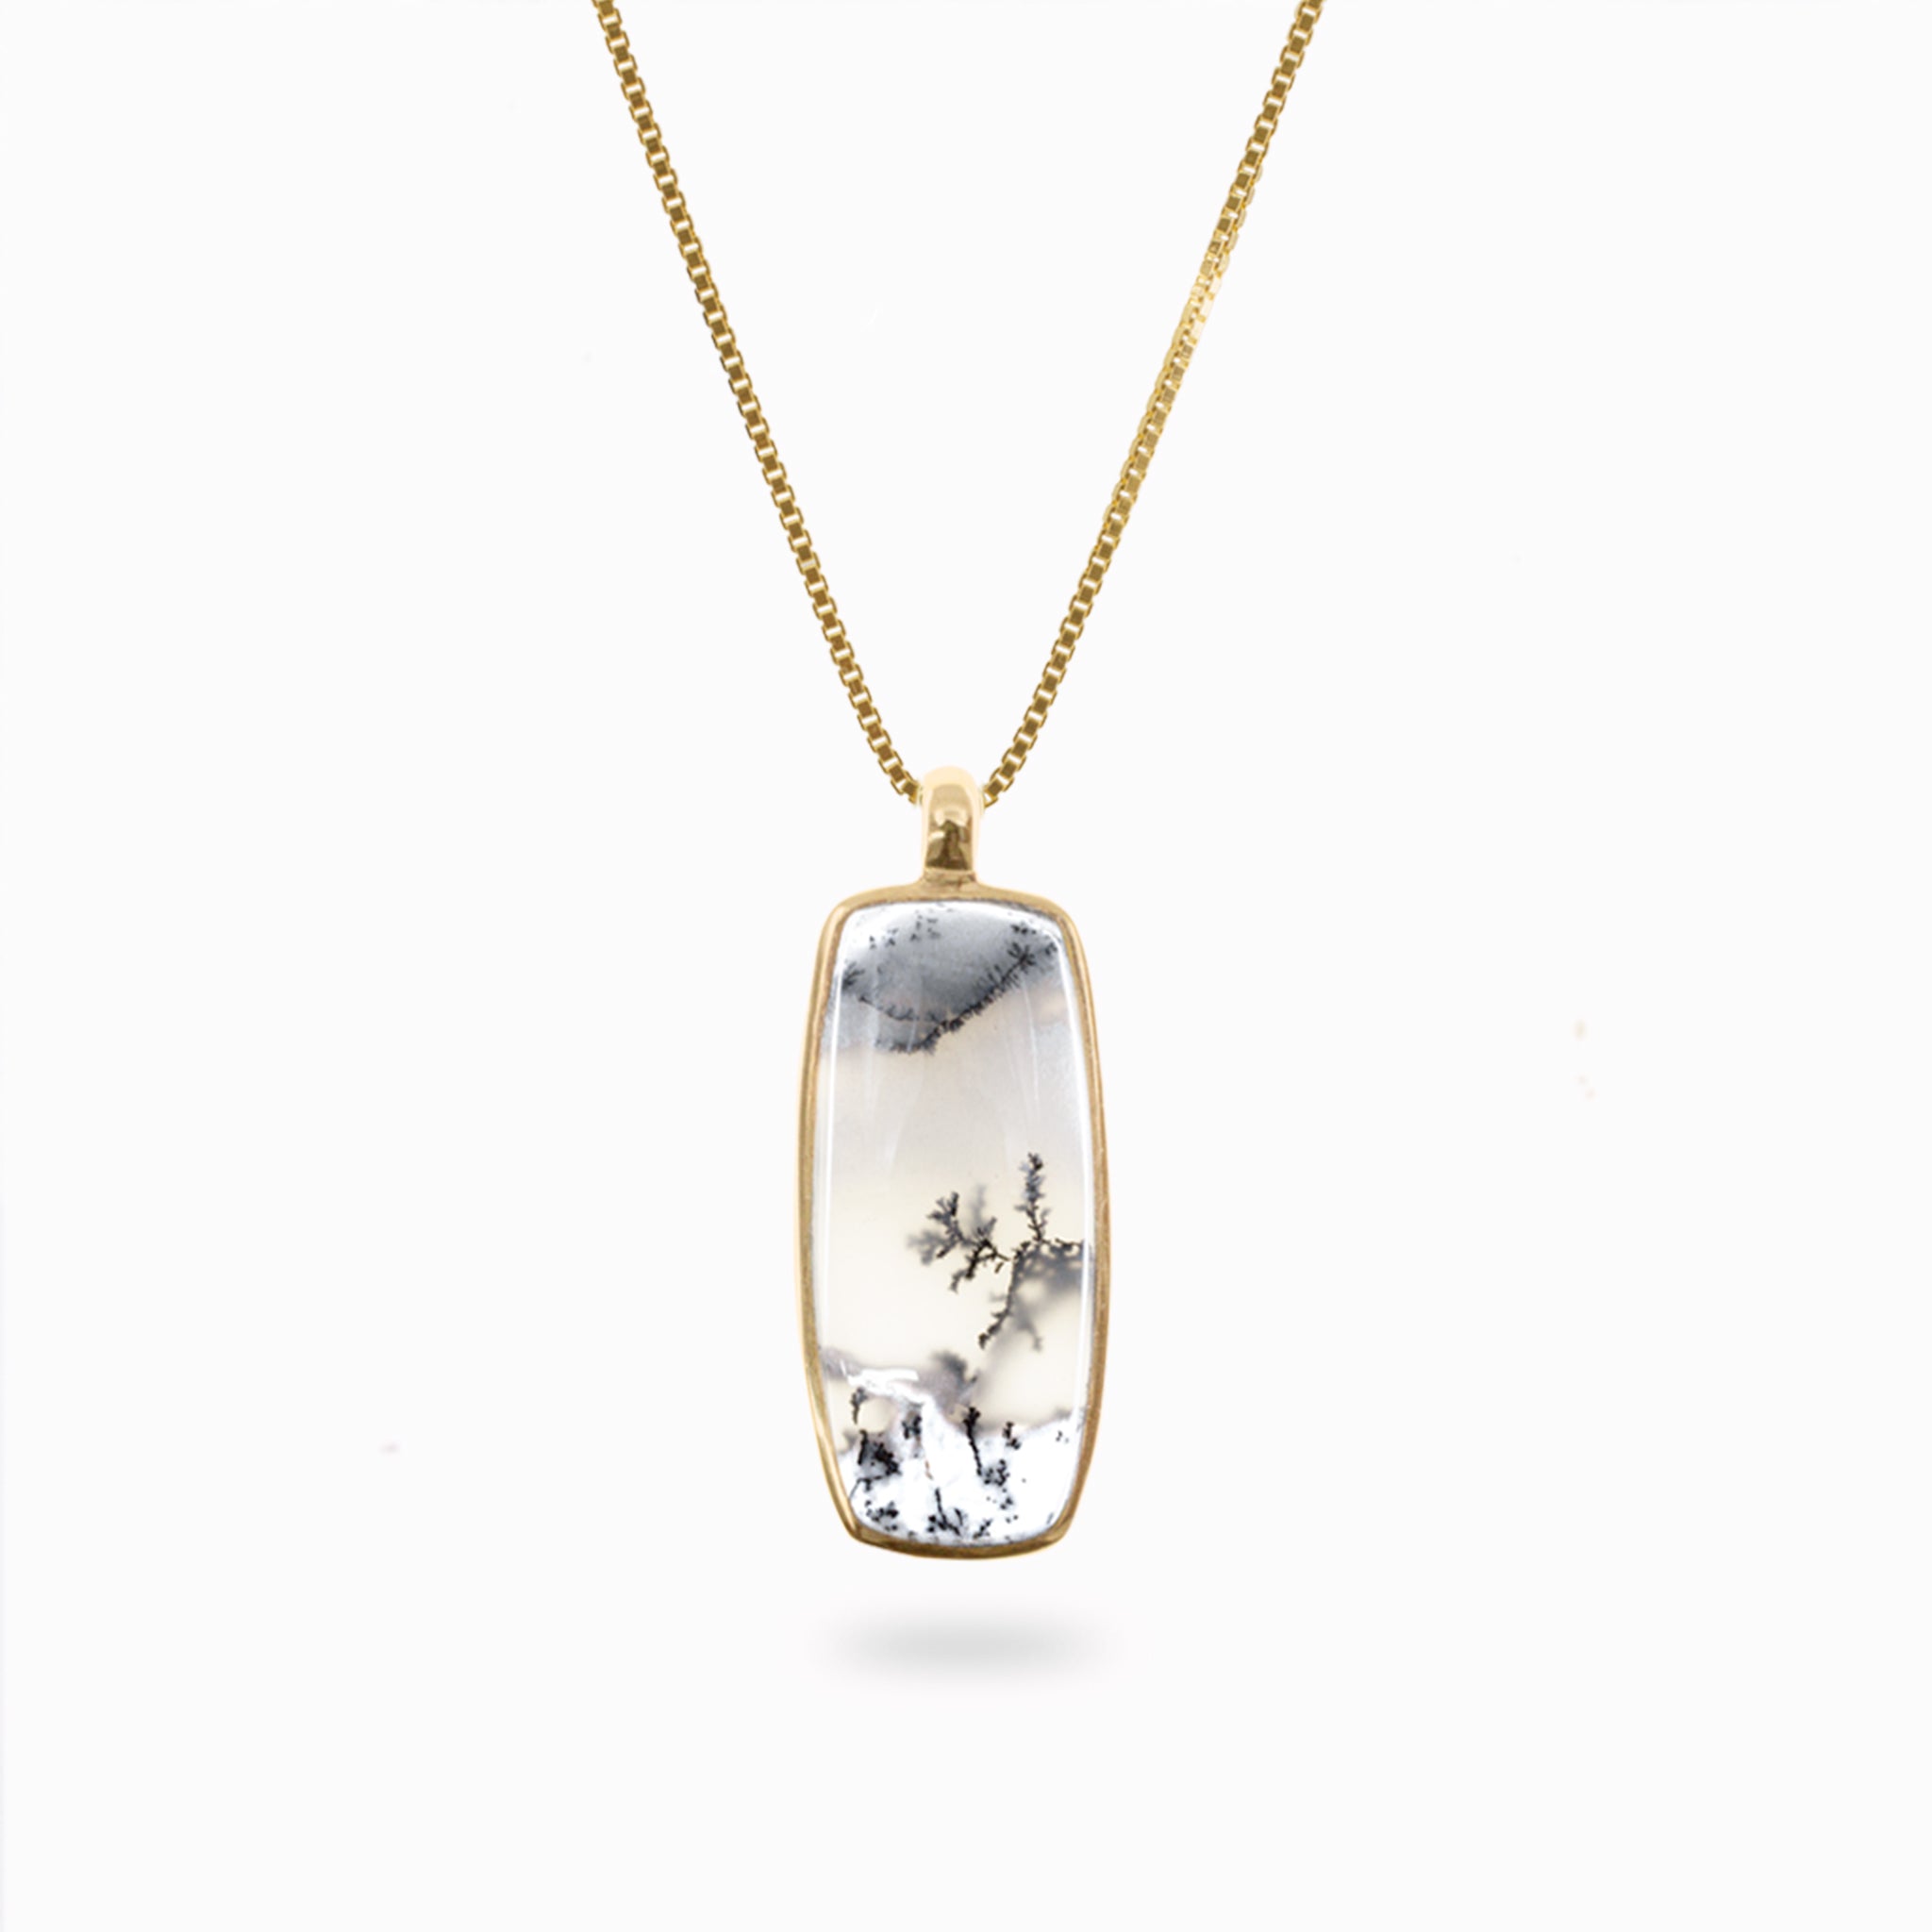 dendritic opal necklace